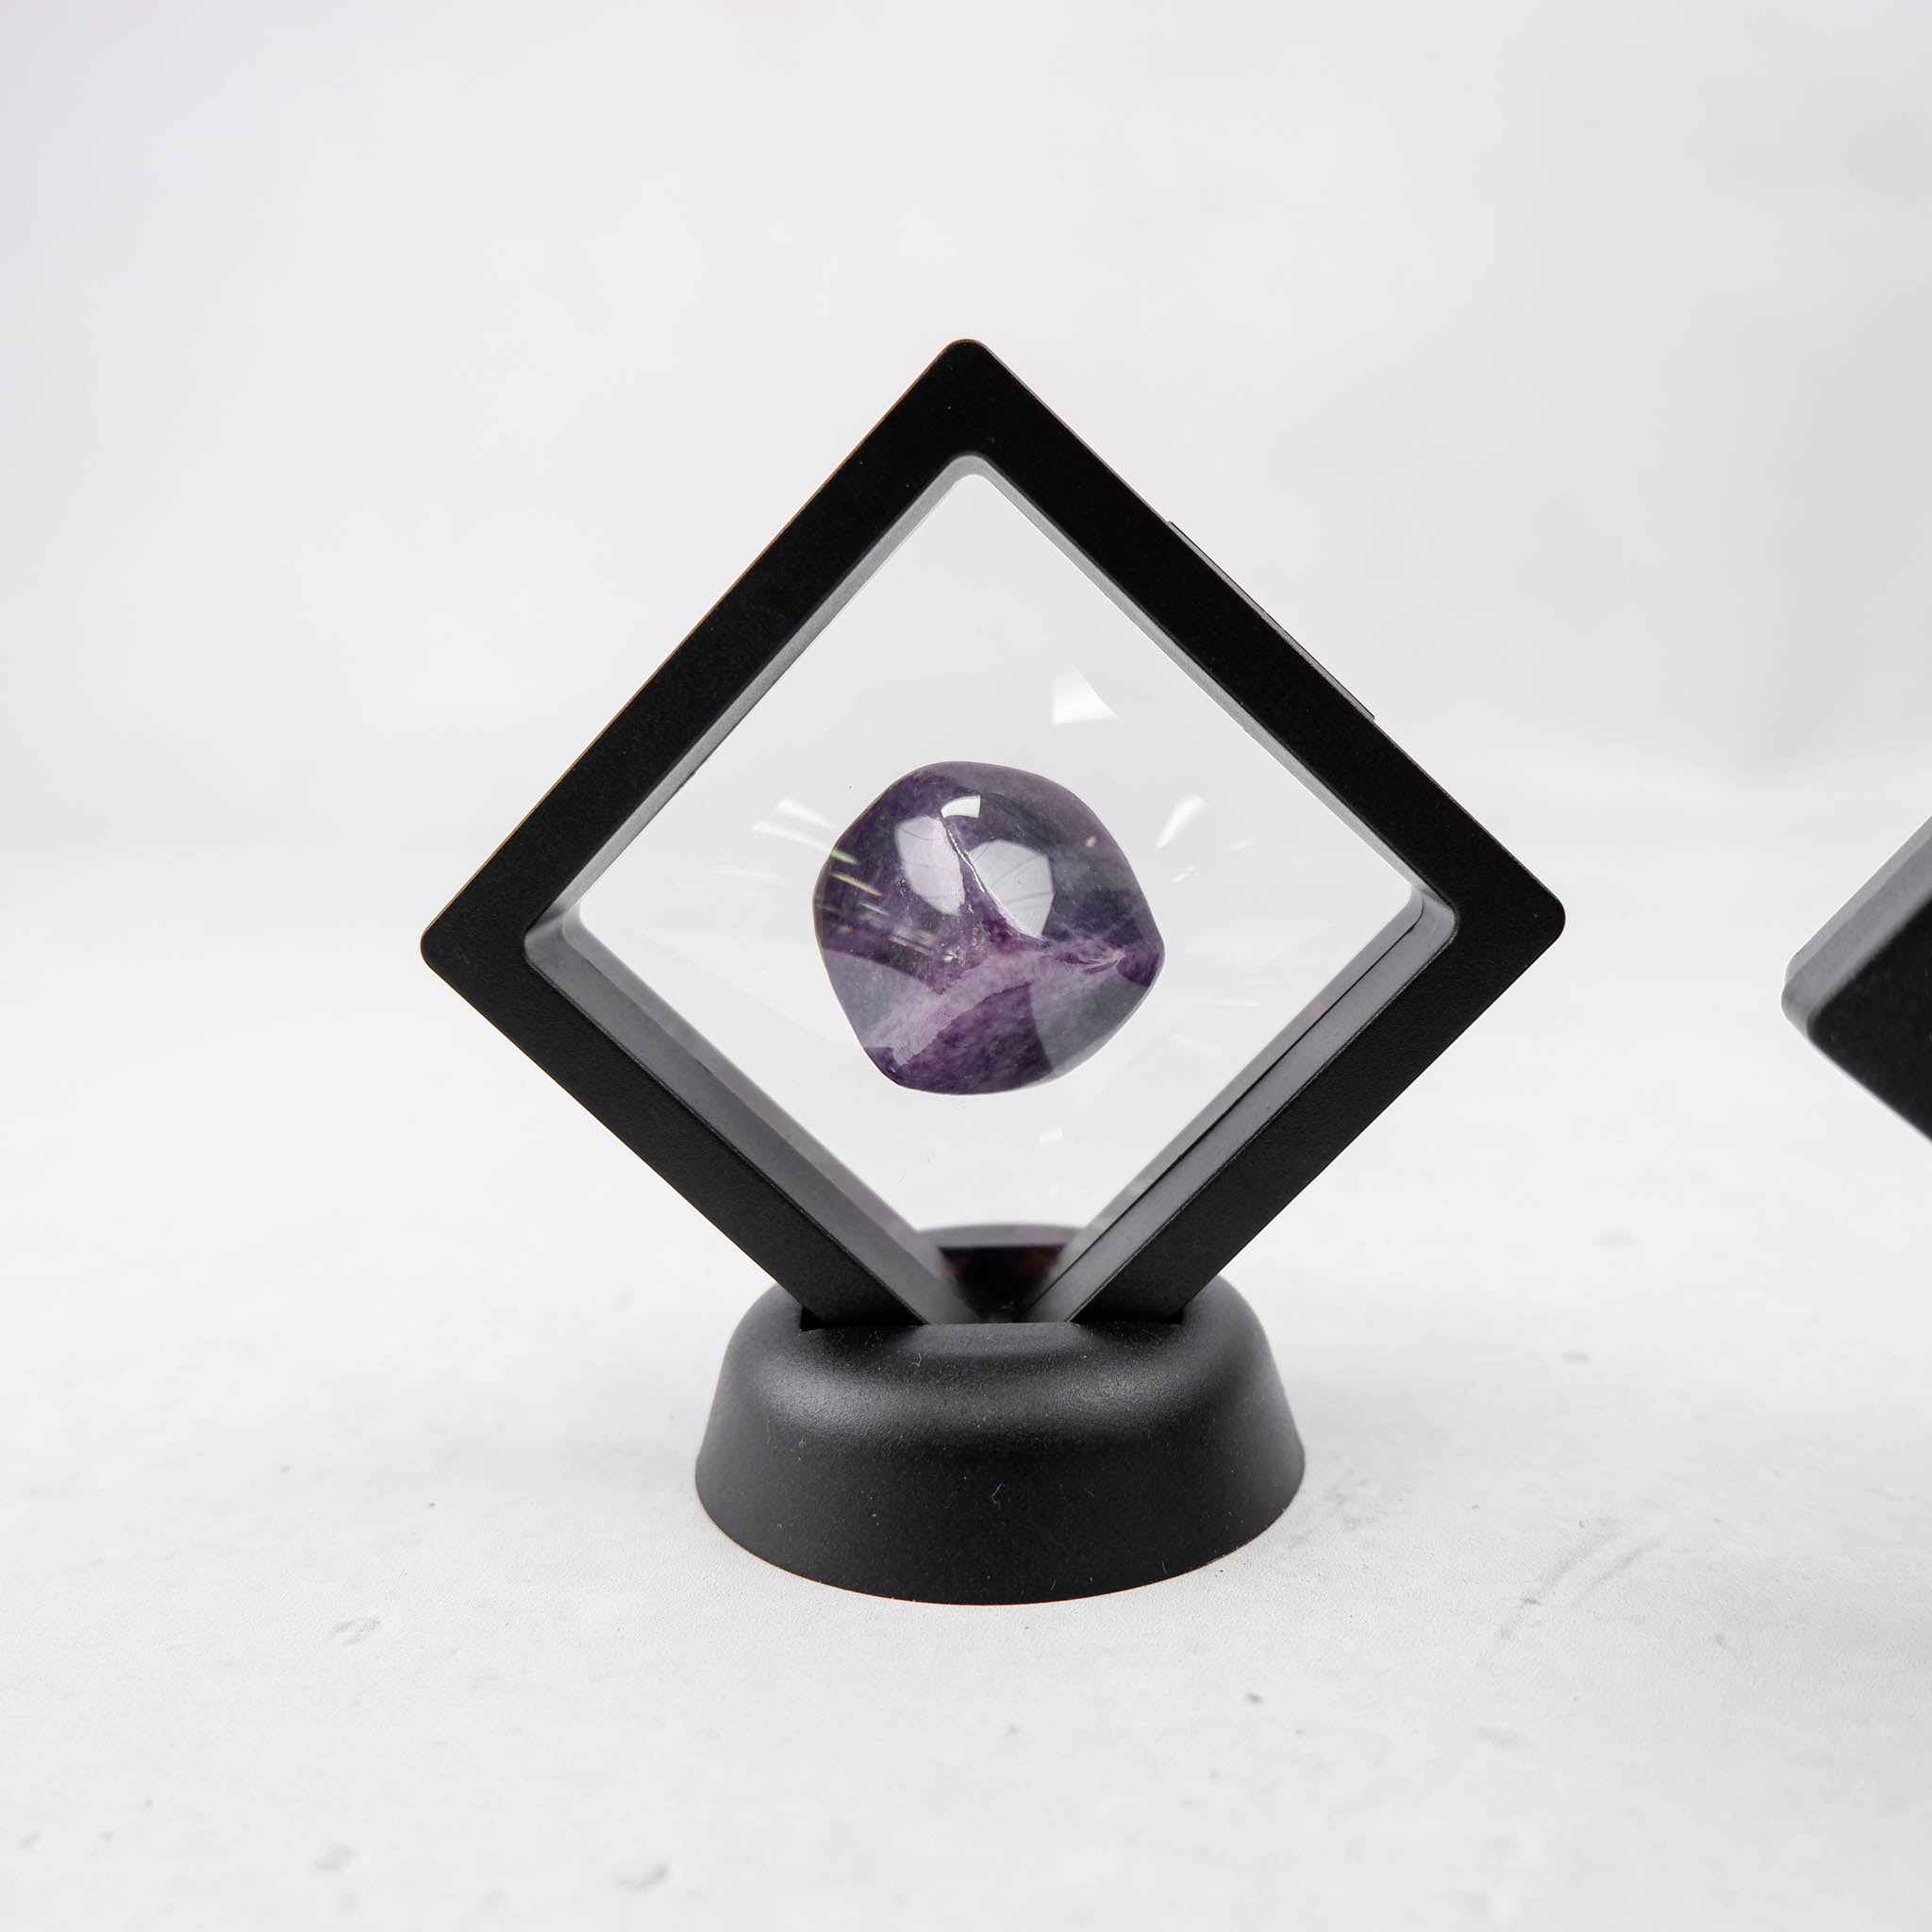 Mineral Display Stand - Crystal & Stone